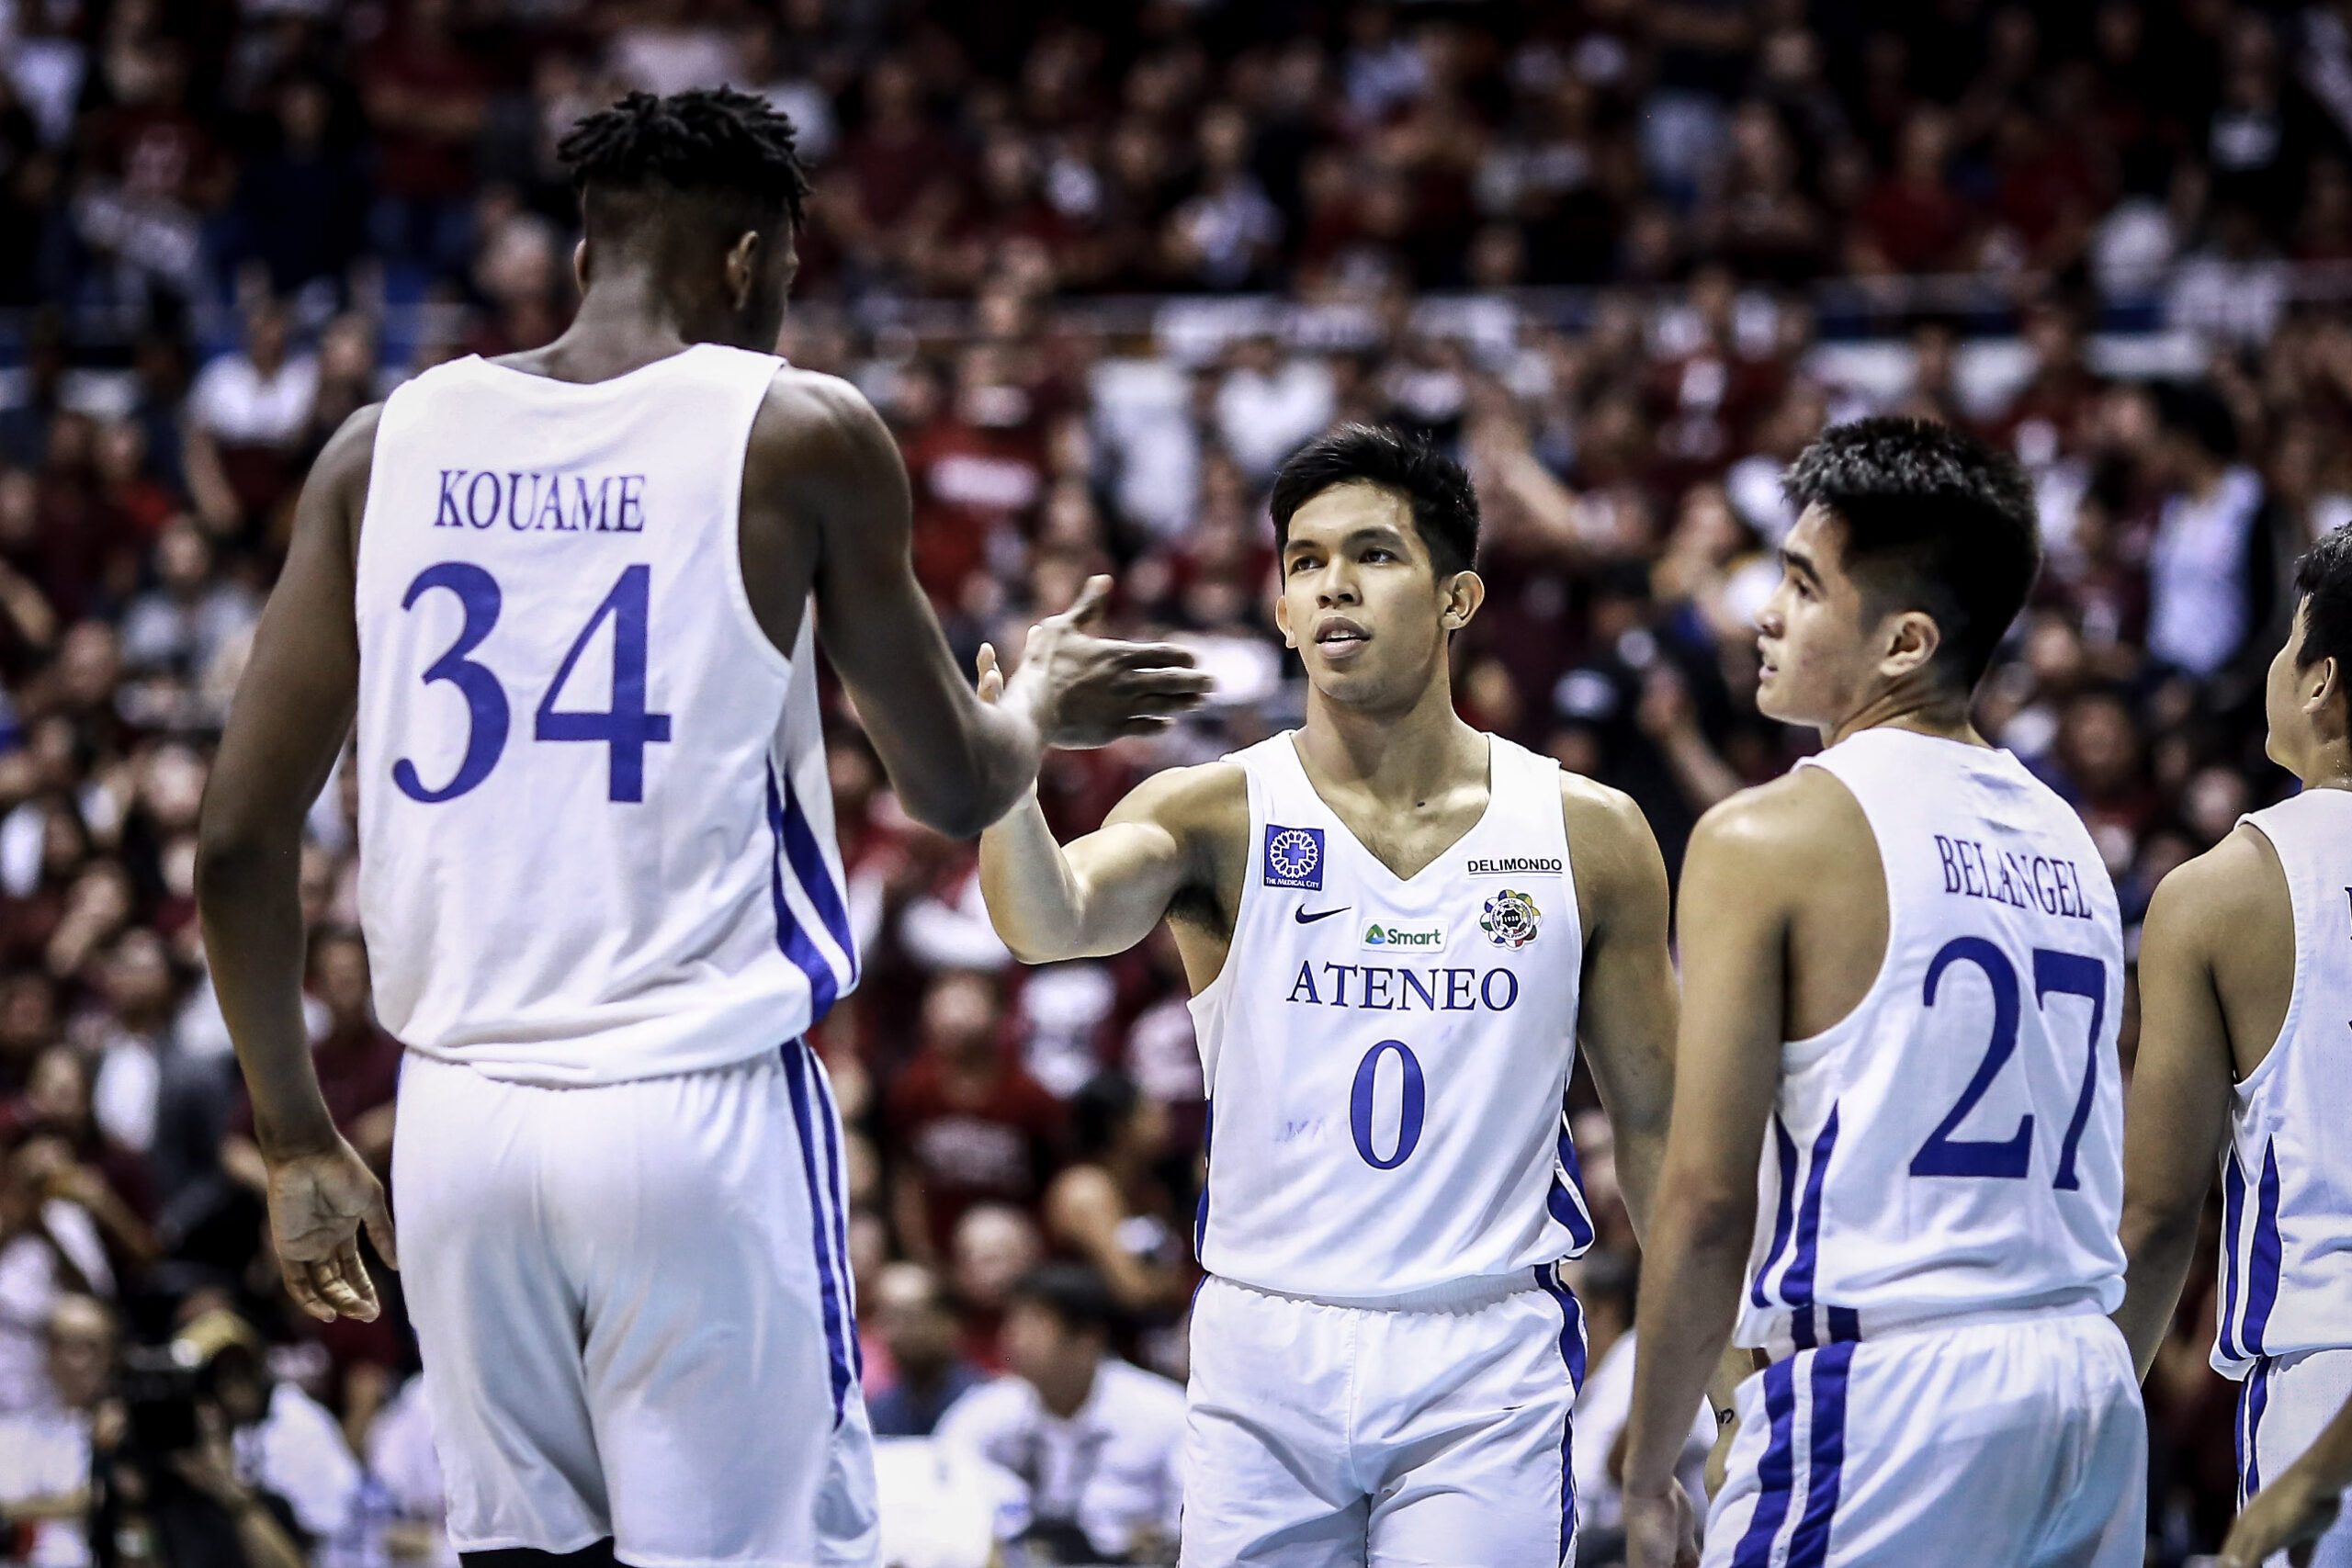 No surprise: UAAP teams pick Ateneo as team to beat